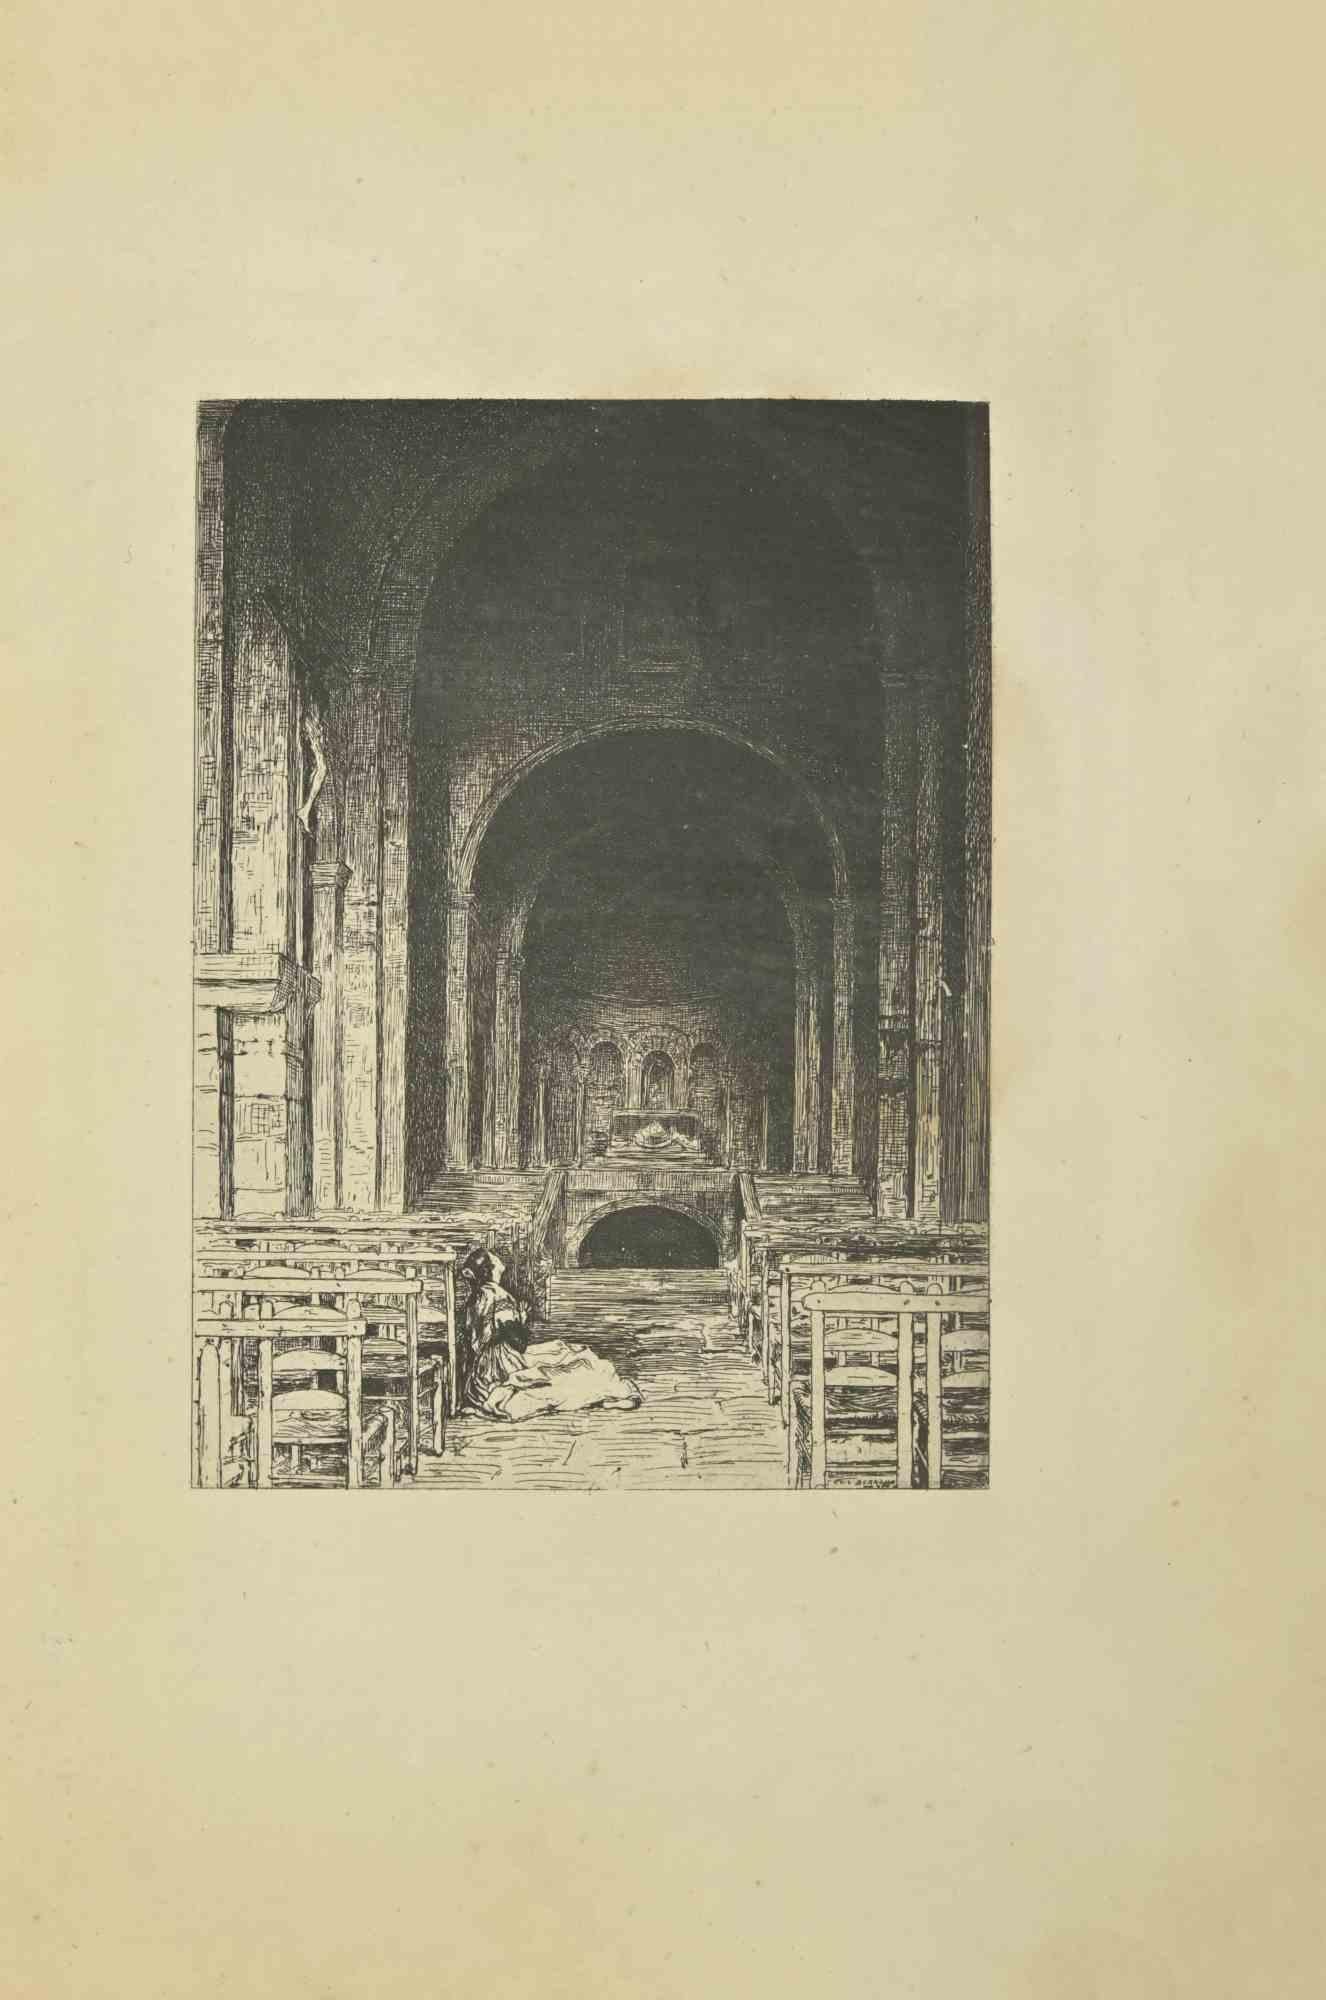 In the Church - Etching by Eugène Burnand - Late 19th century